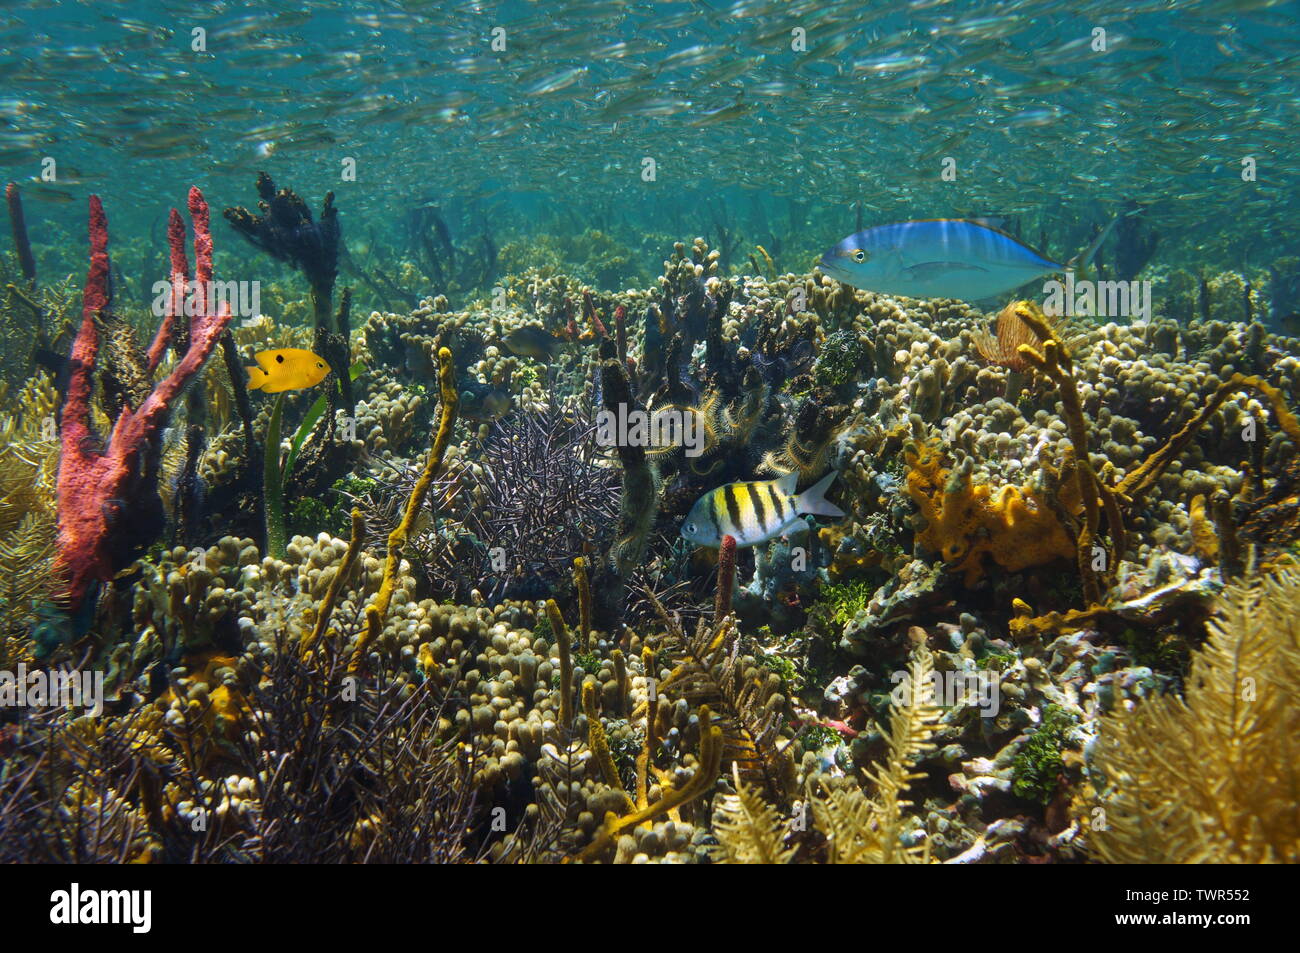 Thriving marine life in a coral reef underwater in the Caribbean sea, Belize Stock Photo